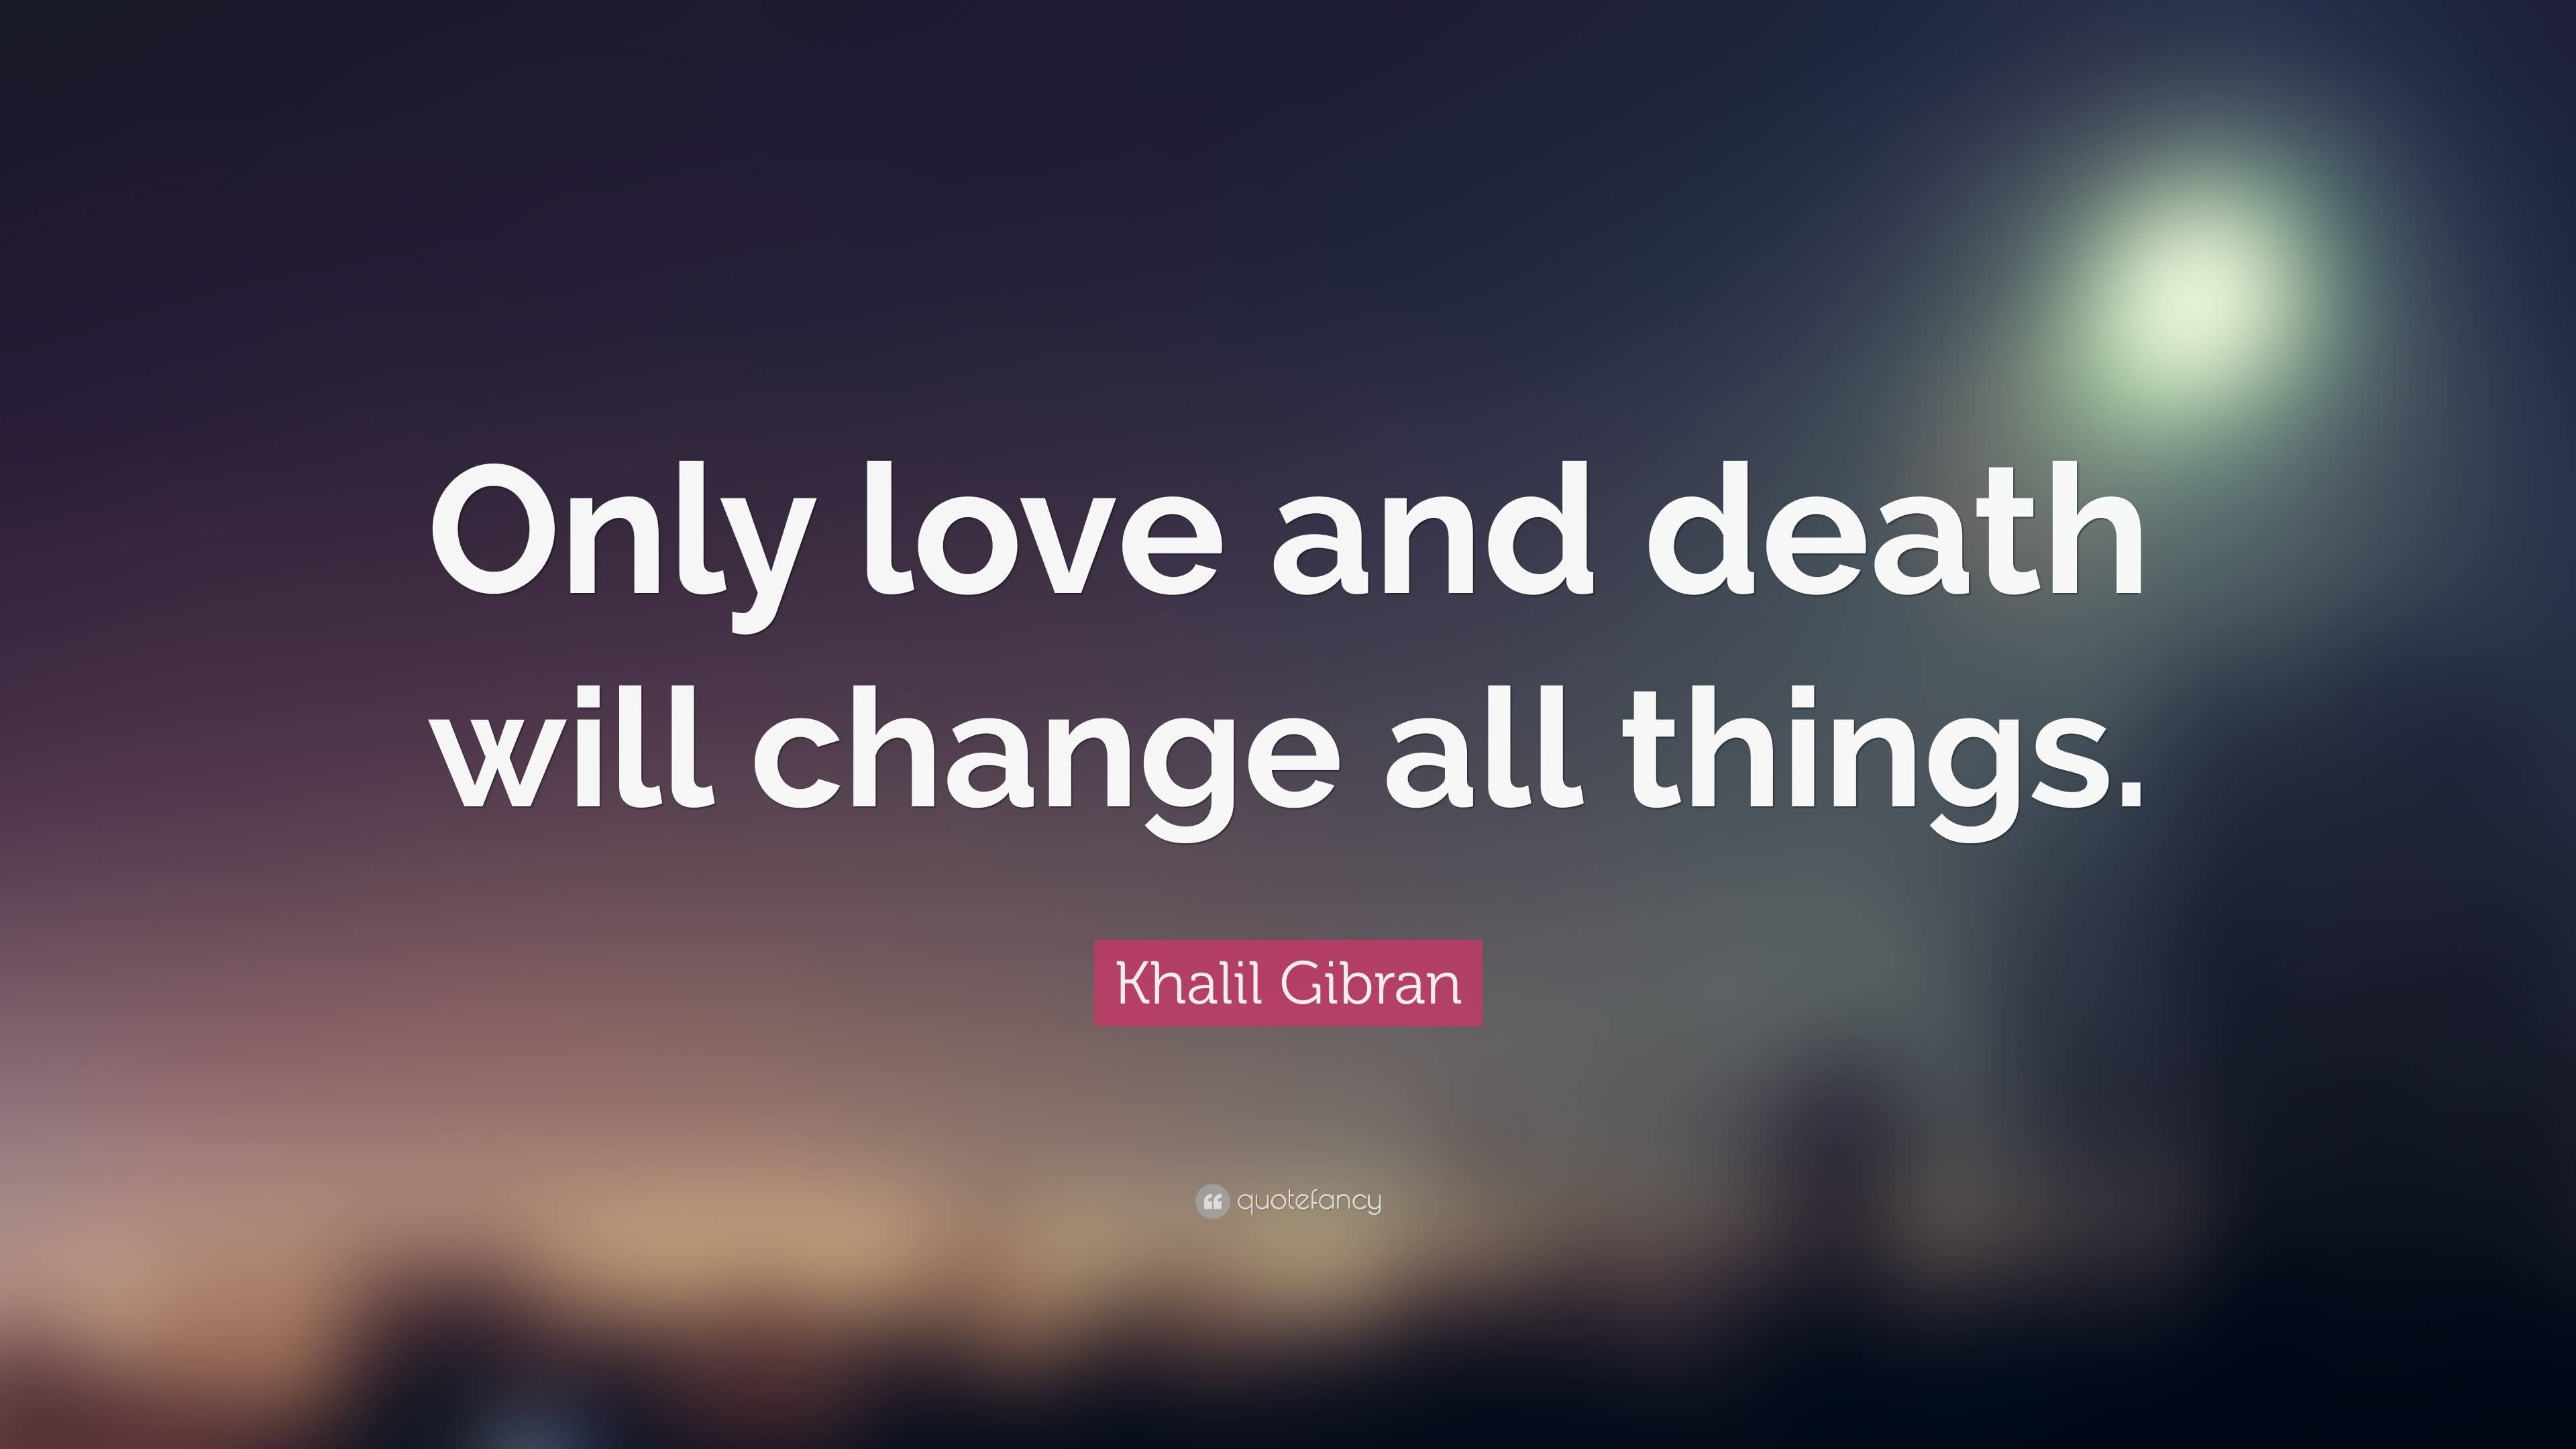 Quotes About Love And Death 03